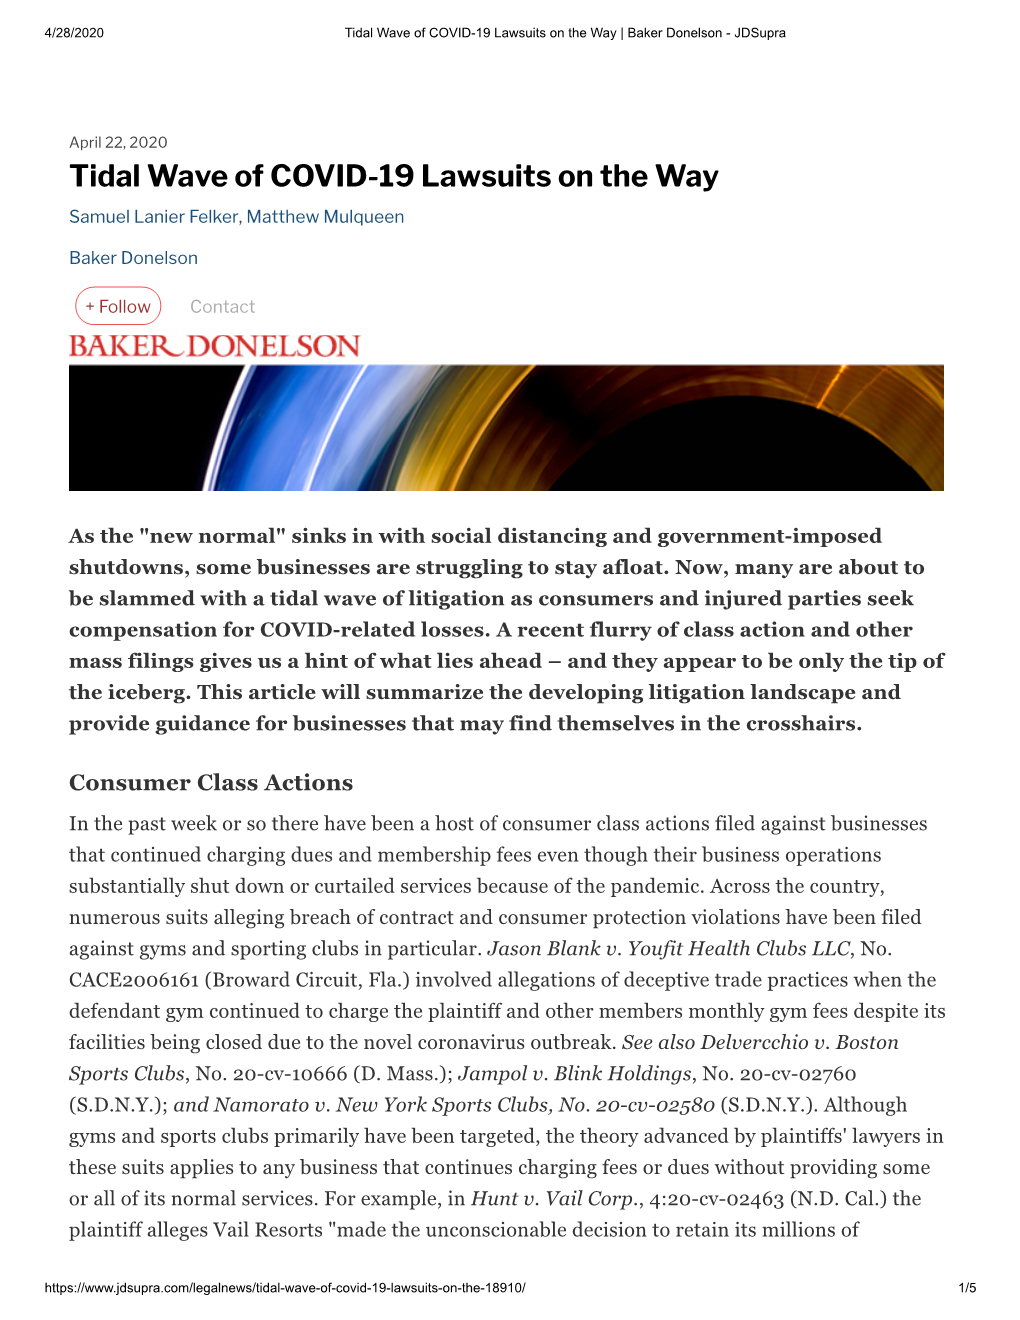 Tidal Wave of COVID-19 Lawsuits on the Way | Baker Donelson - Jdsupra